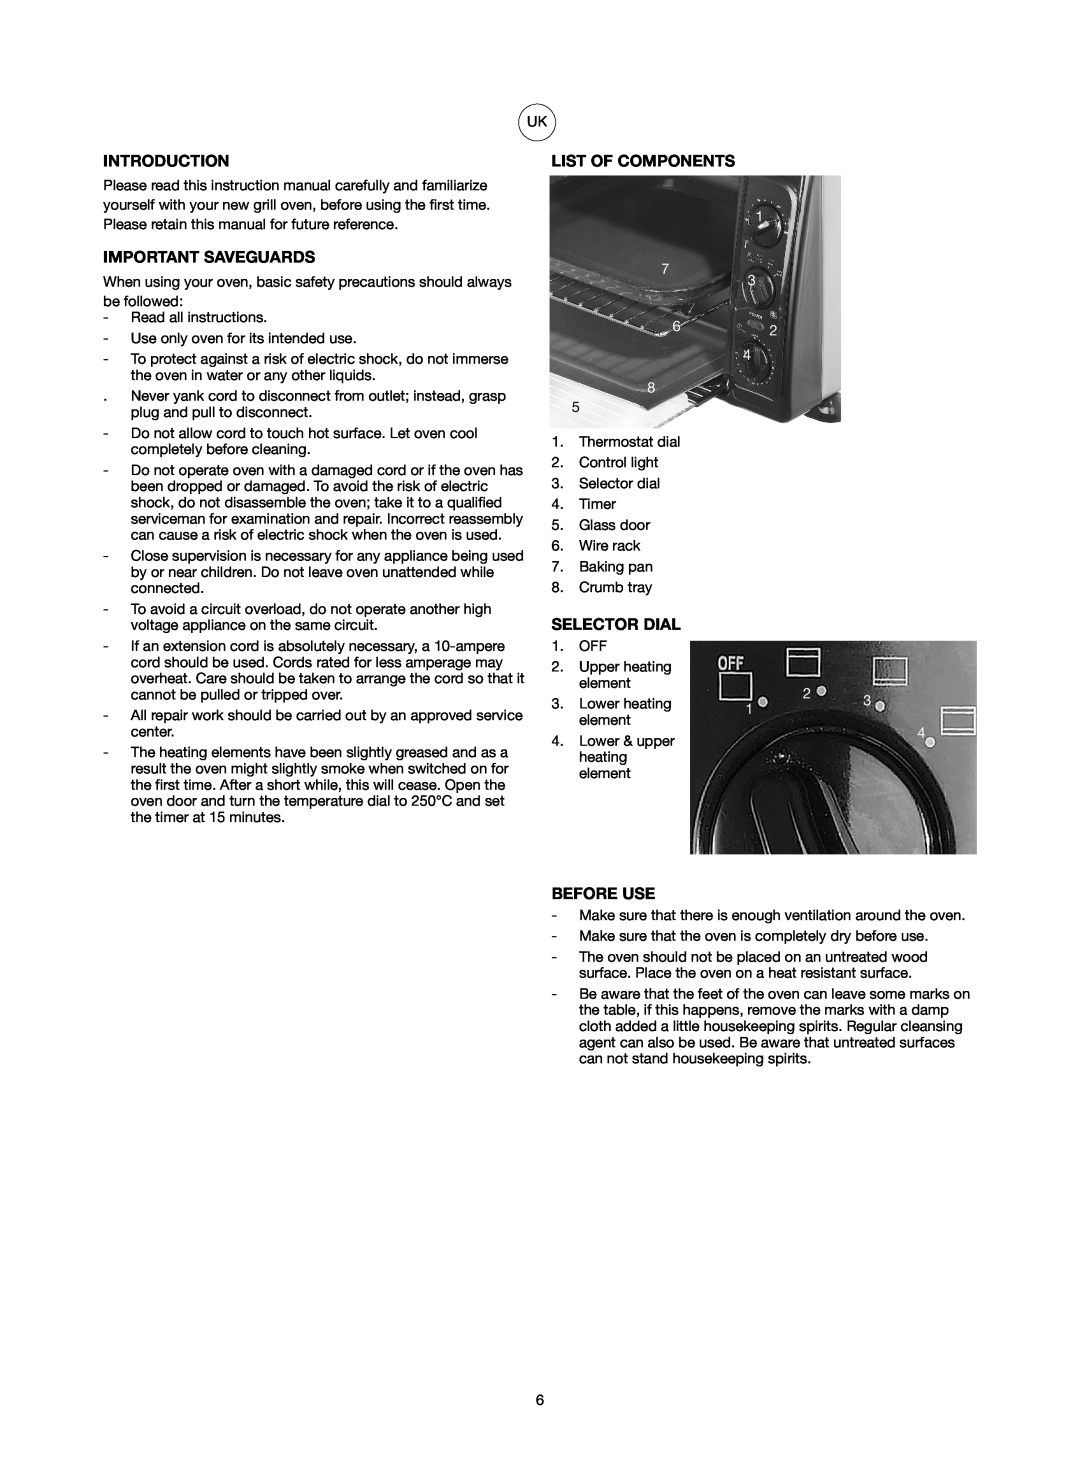 Ide Line 751-079 manual Introduction, Important Saveguards, List Of Components, Selector Dial, Before Use, 1 7 3 